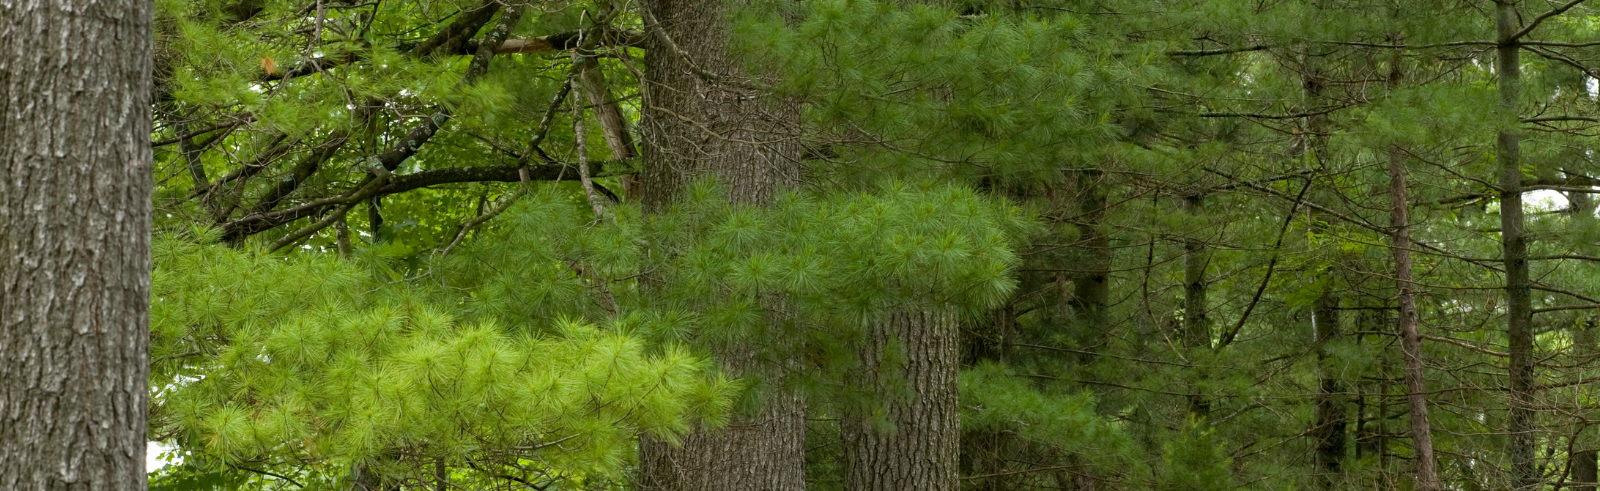 White Pines in a forest